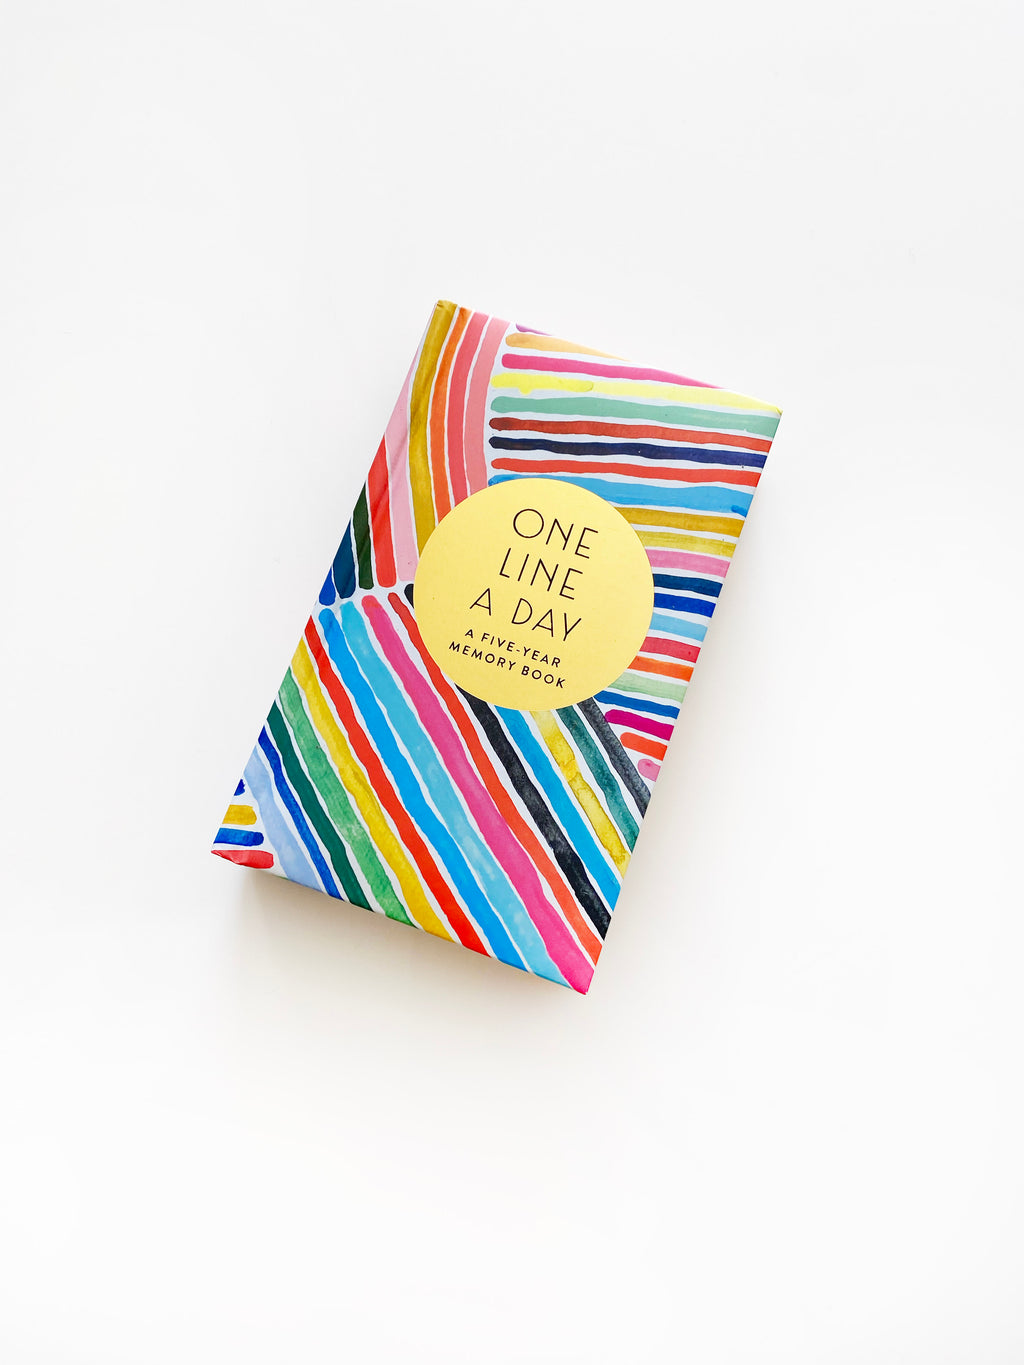 Pre-Order: Signed Copy - Rainbow One Line a Day: A Five-Year Memory Book